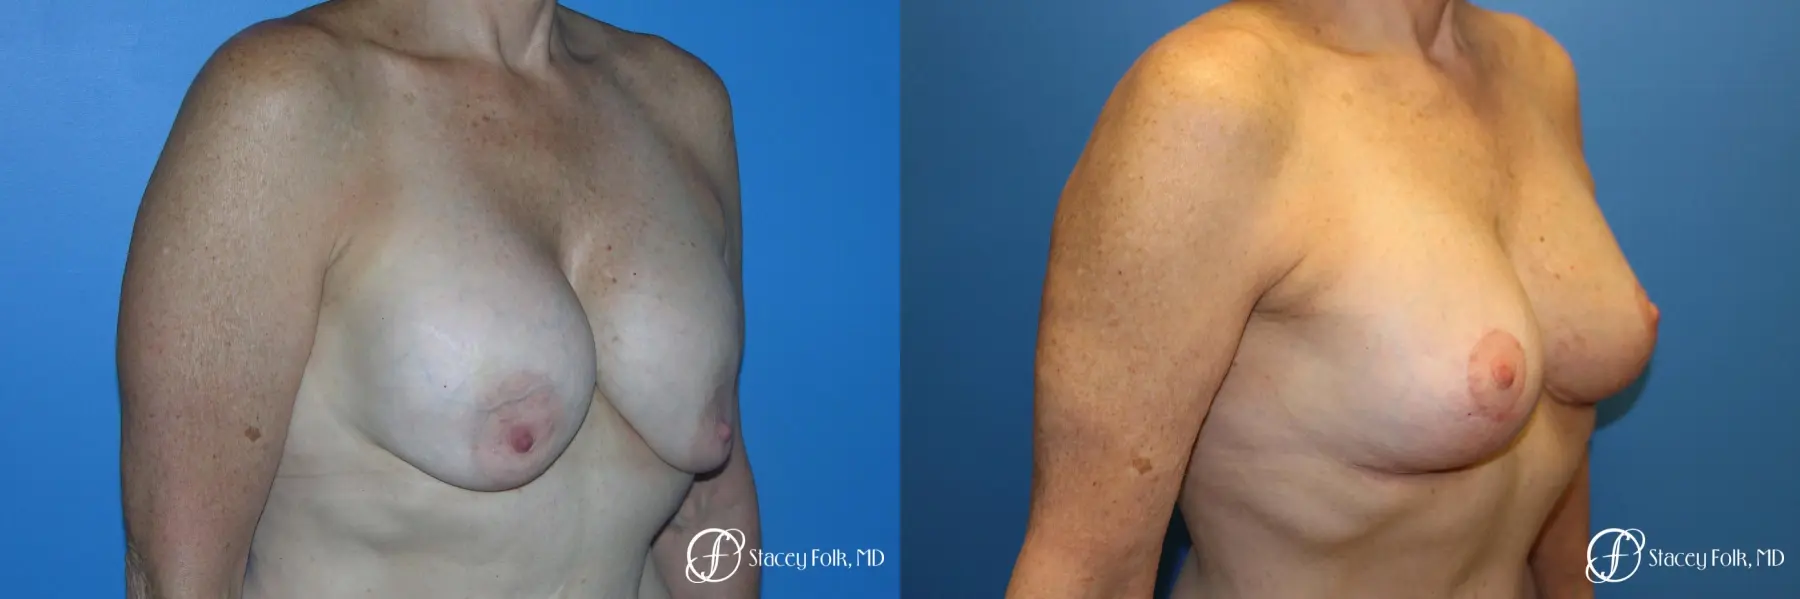 Denver Breast Revision 7990 - Before and After 2